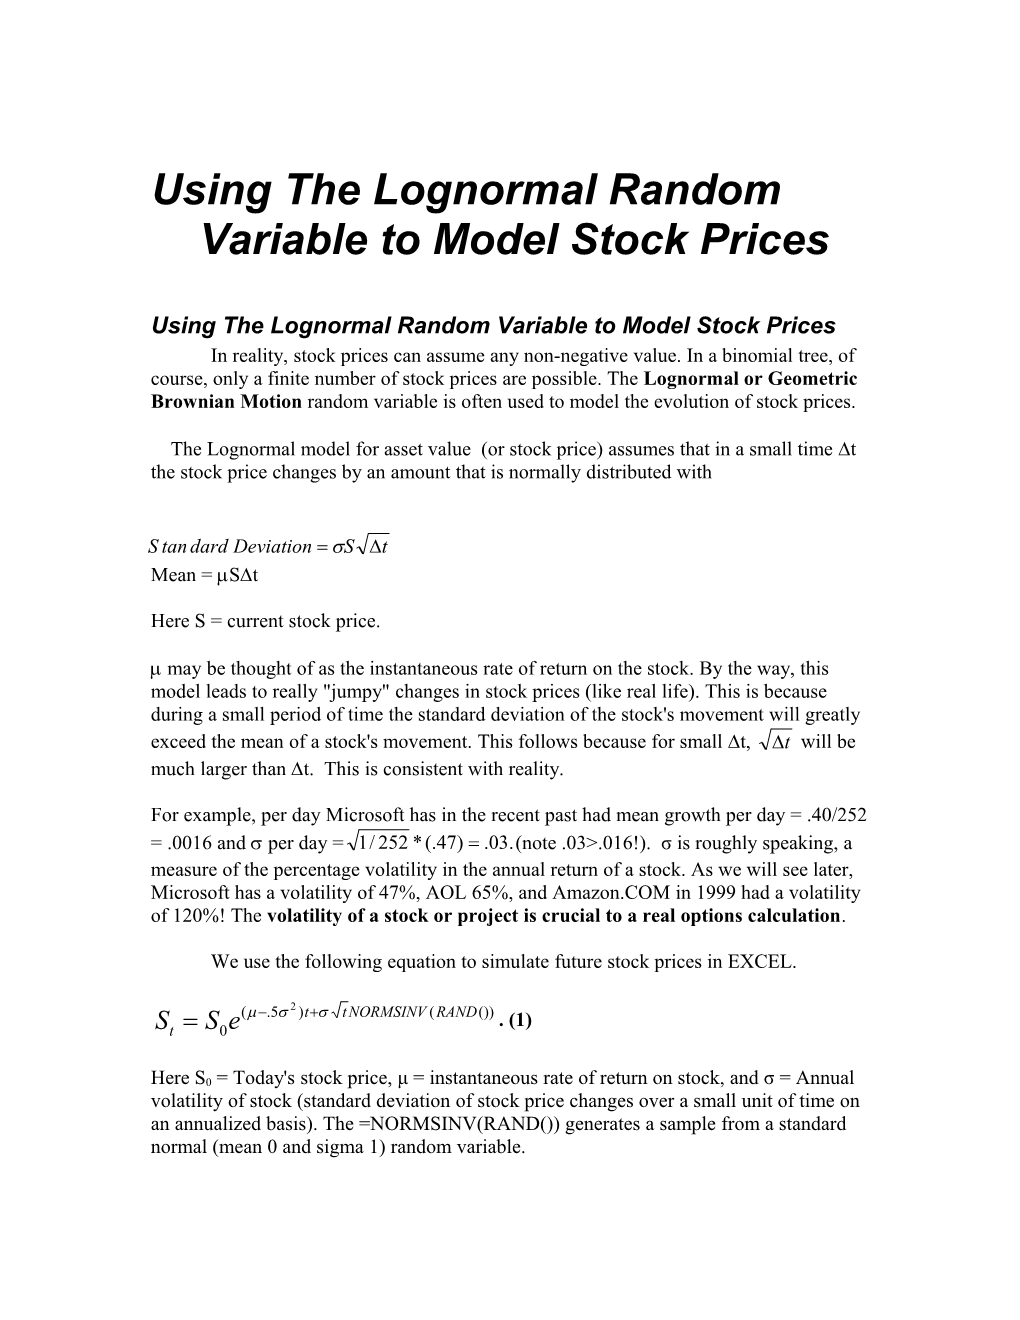 Using the Lognormal Random Variable to Model Stock Prices